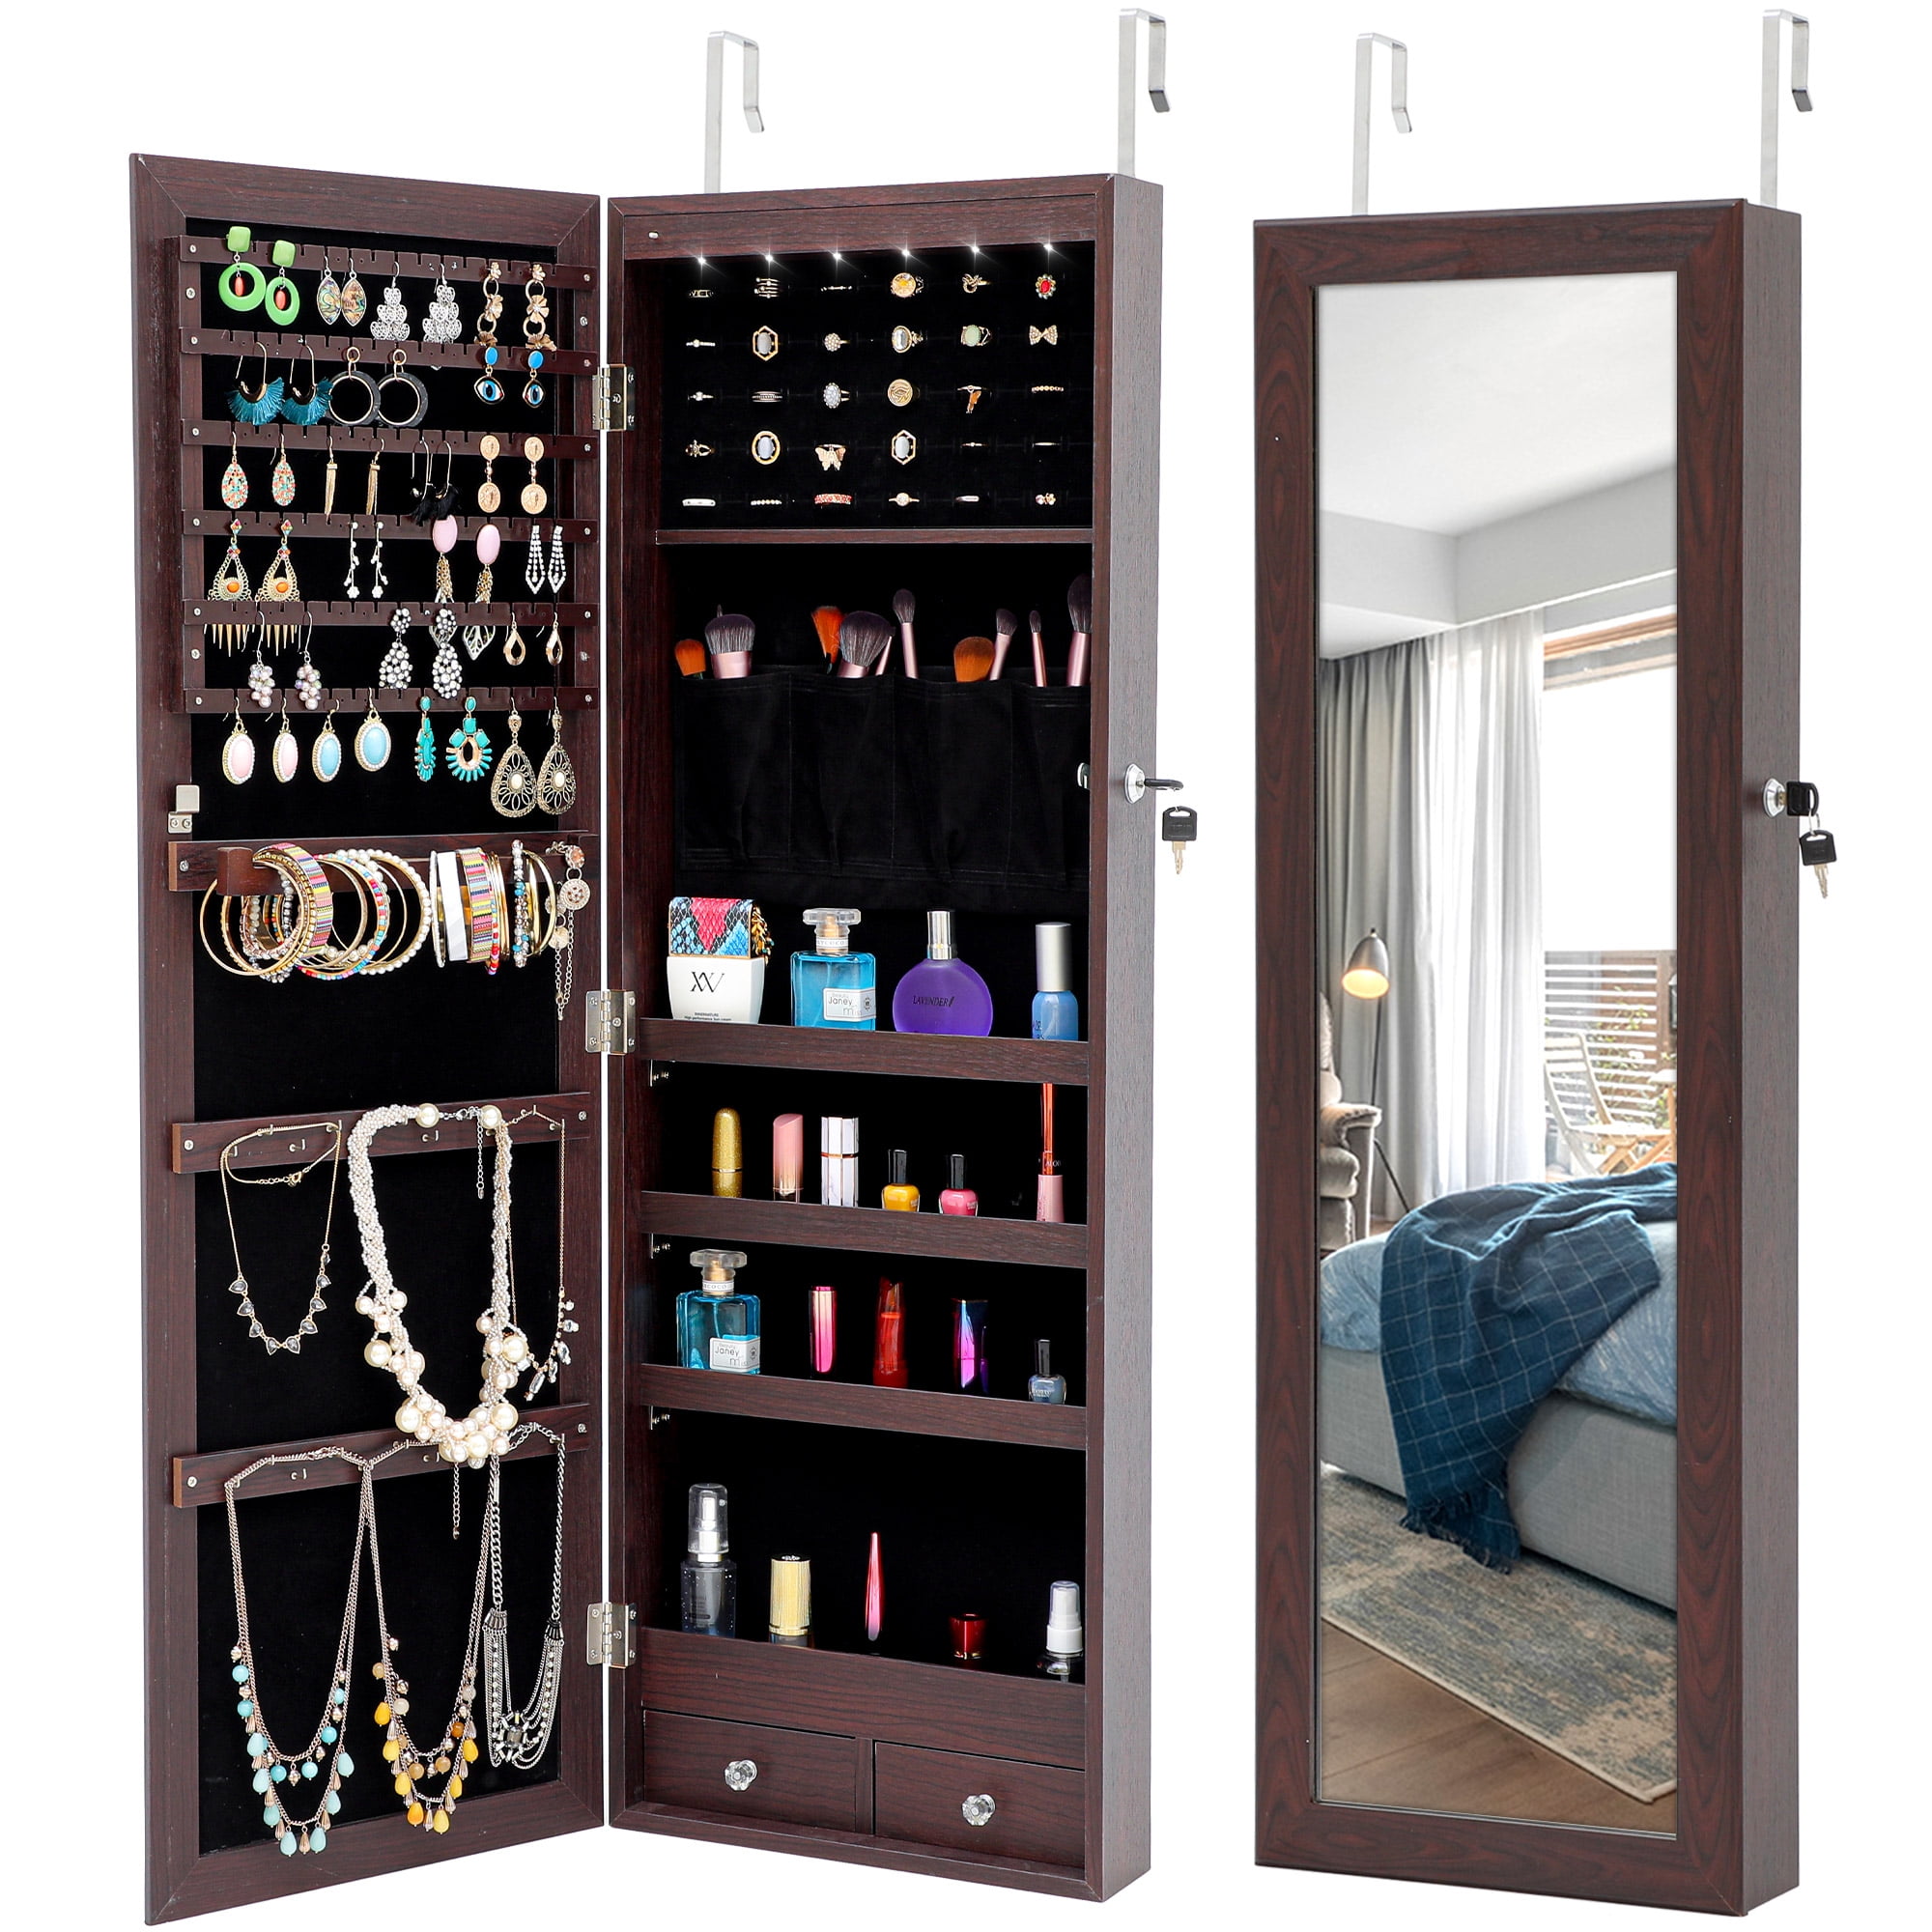 Jewelry Organizer Cabinet, Hanging Jewelry Armoire Organizer with Mirror&LED Lights, Rustic Wall-Mounted Jewelry Storage Organizer, Lockable Mirrored